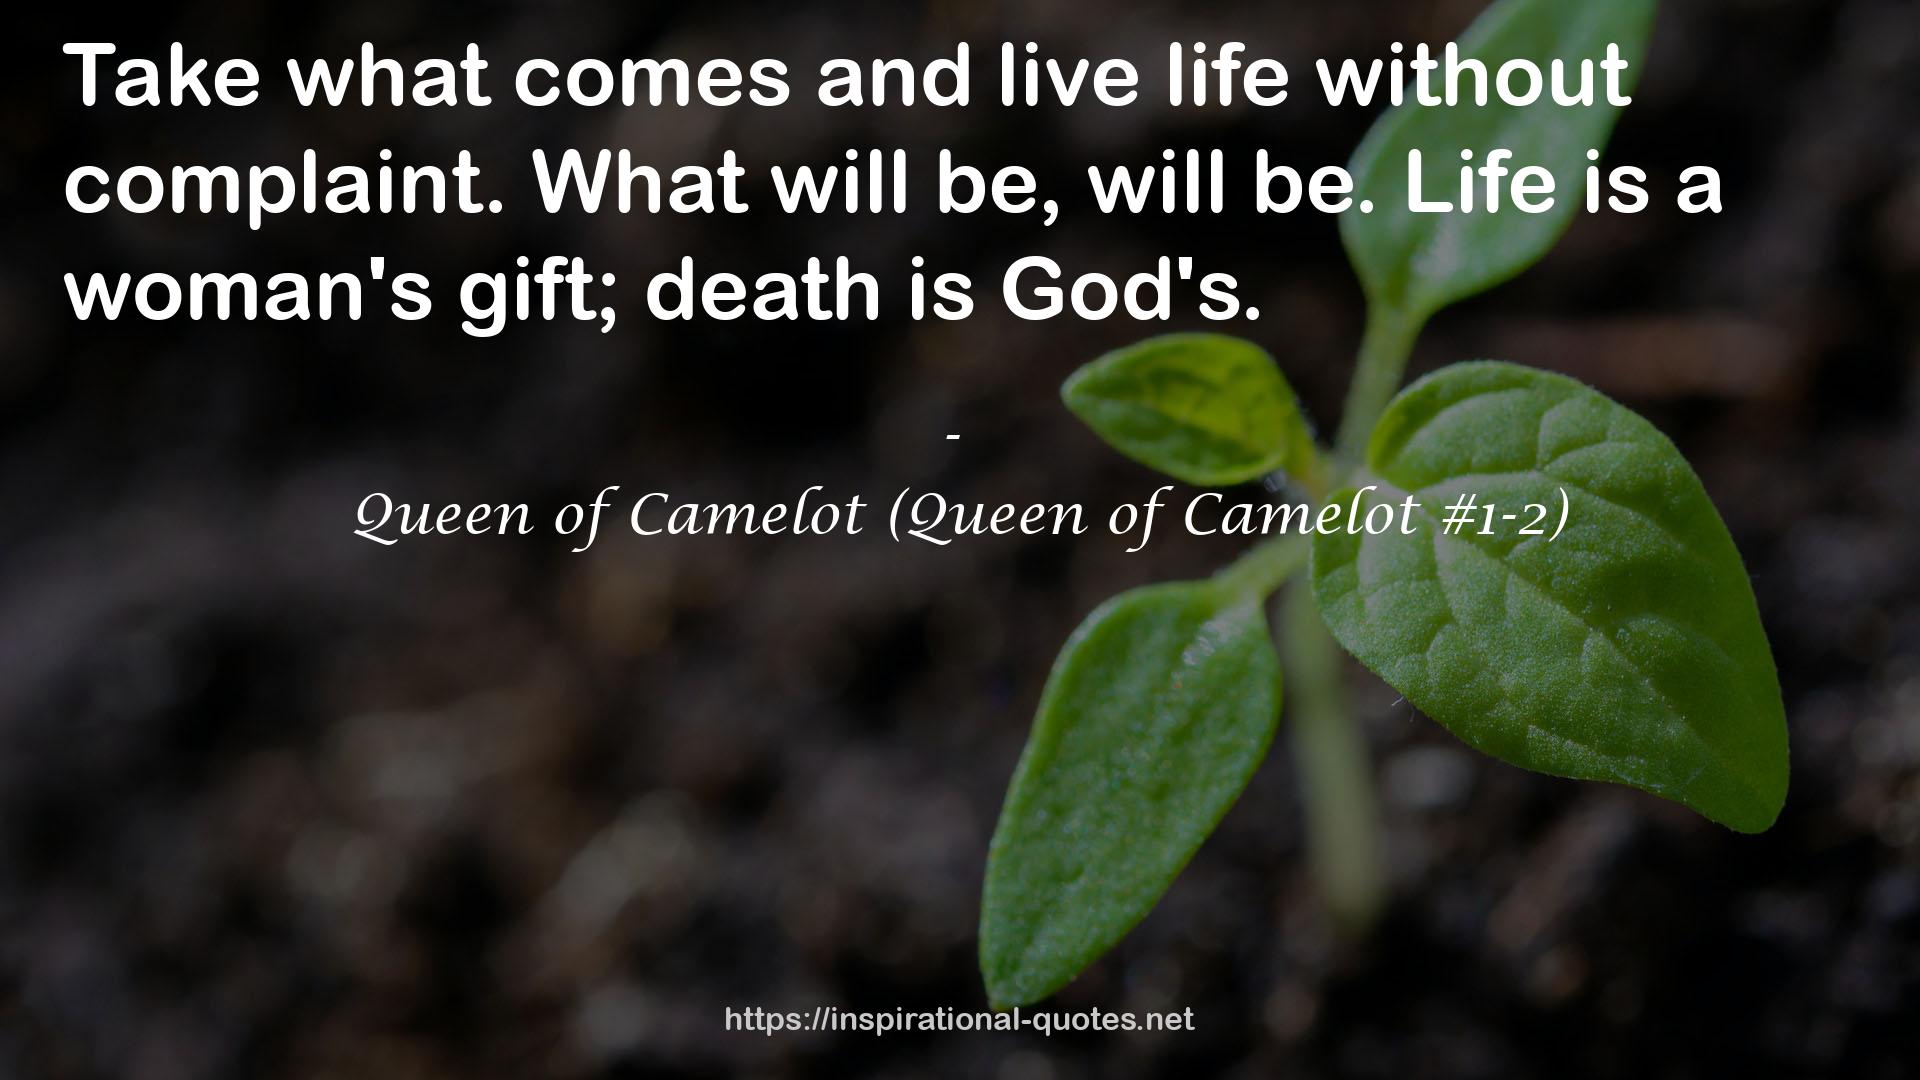 Queen of Camelot (Queen of Camelot #1-2) QUOTES